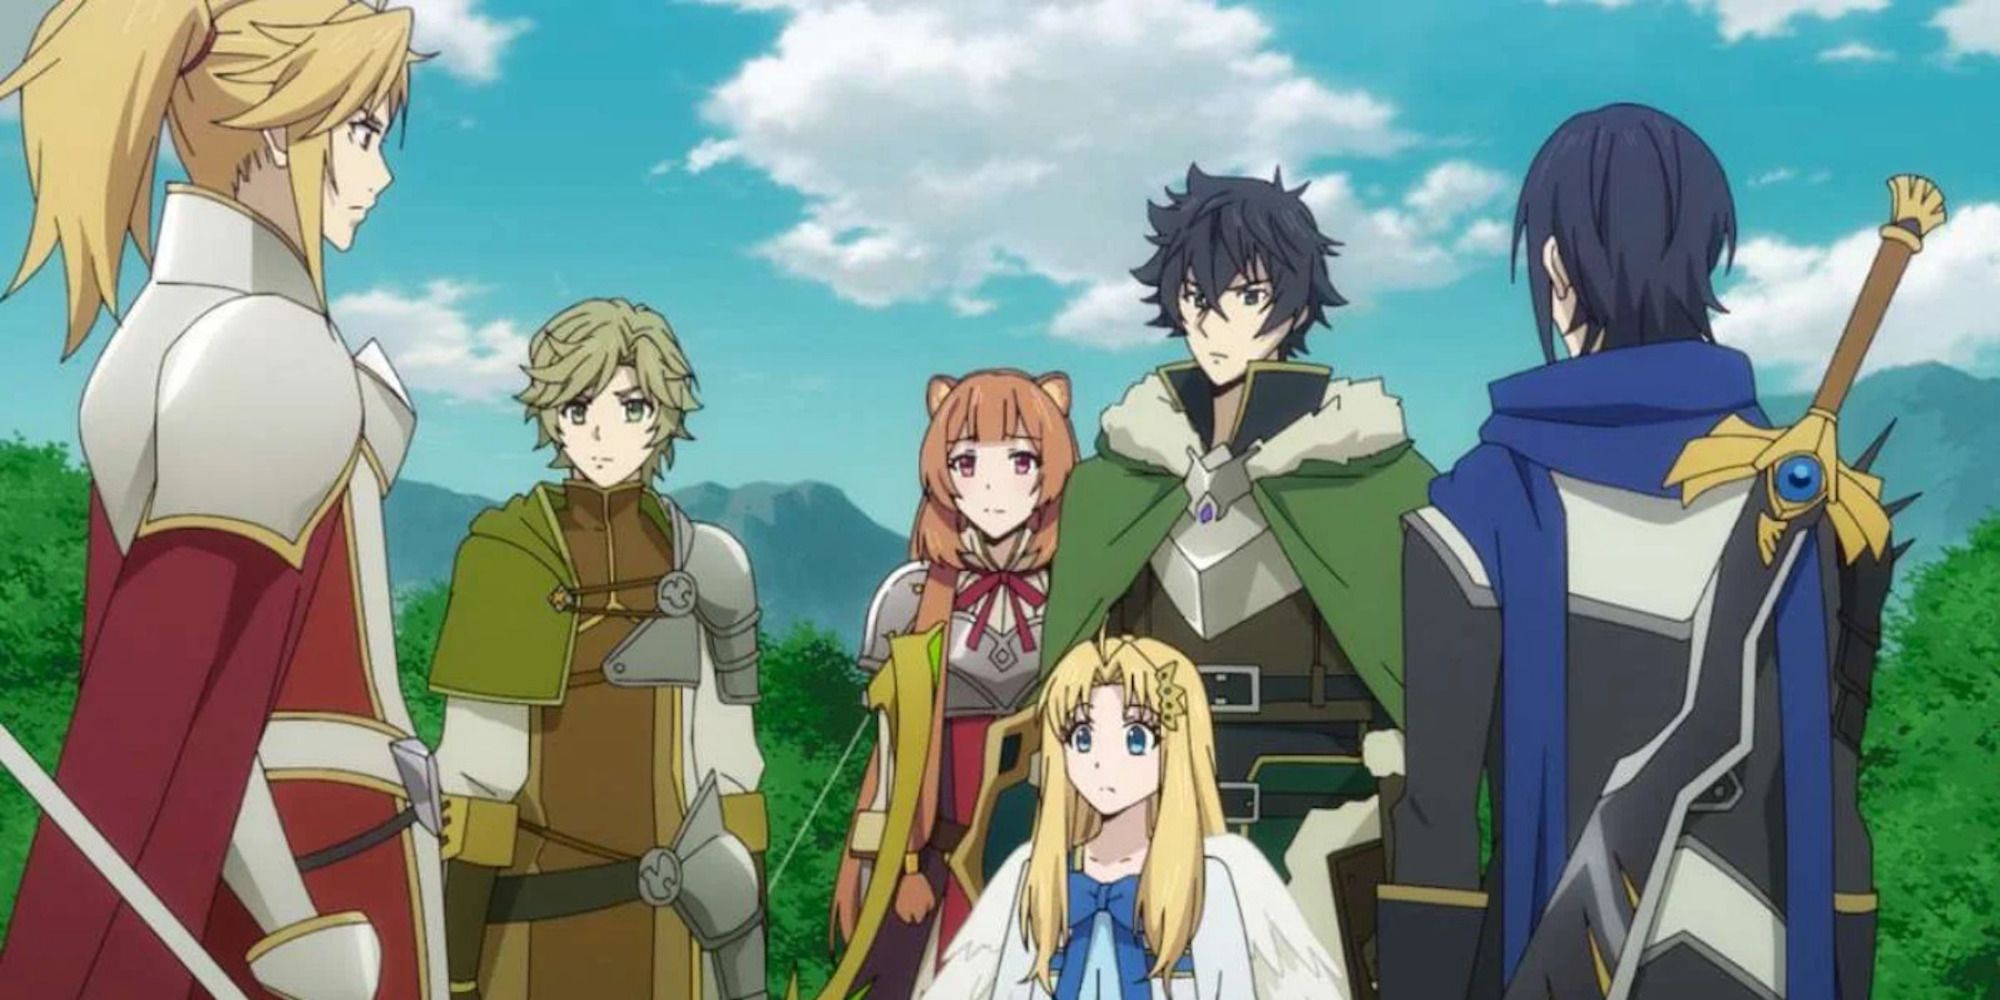 Multiple characters in a scene from The Rising of the Shield Hero